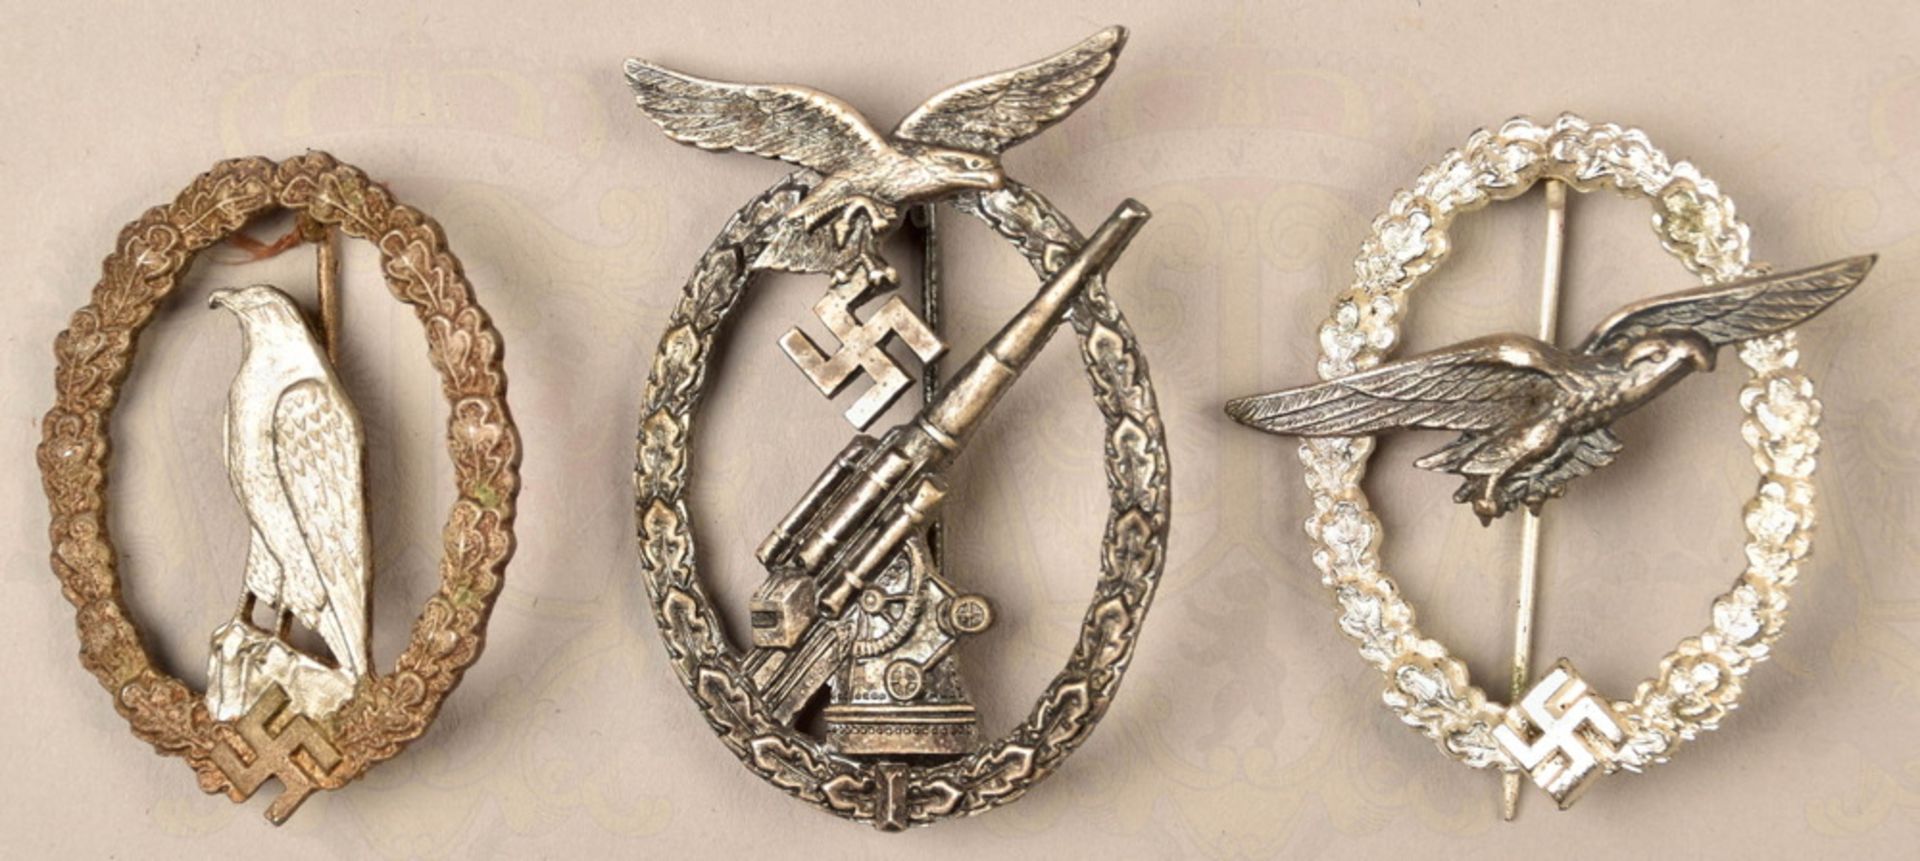 3 Luftwaffe combat badges all made by Souval Vienna - Image 2 of 3